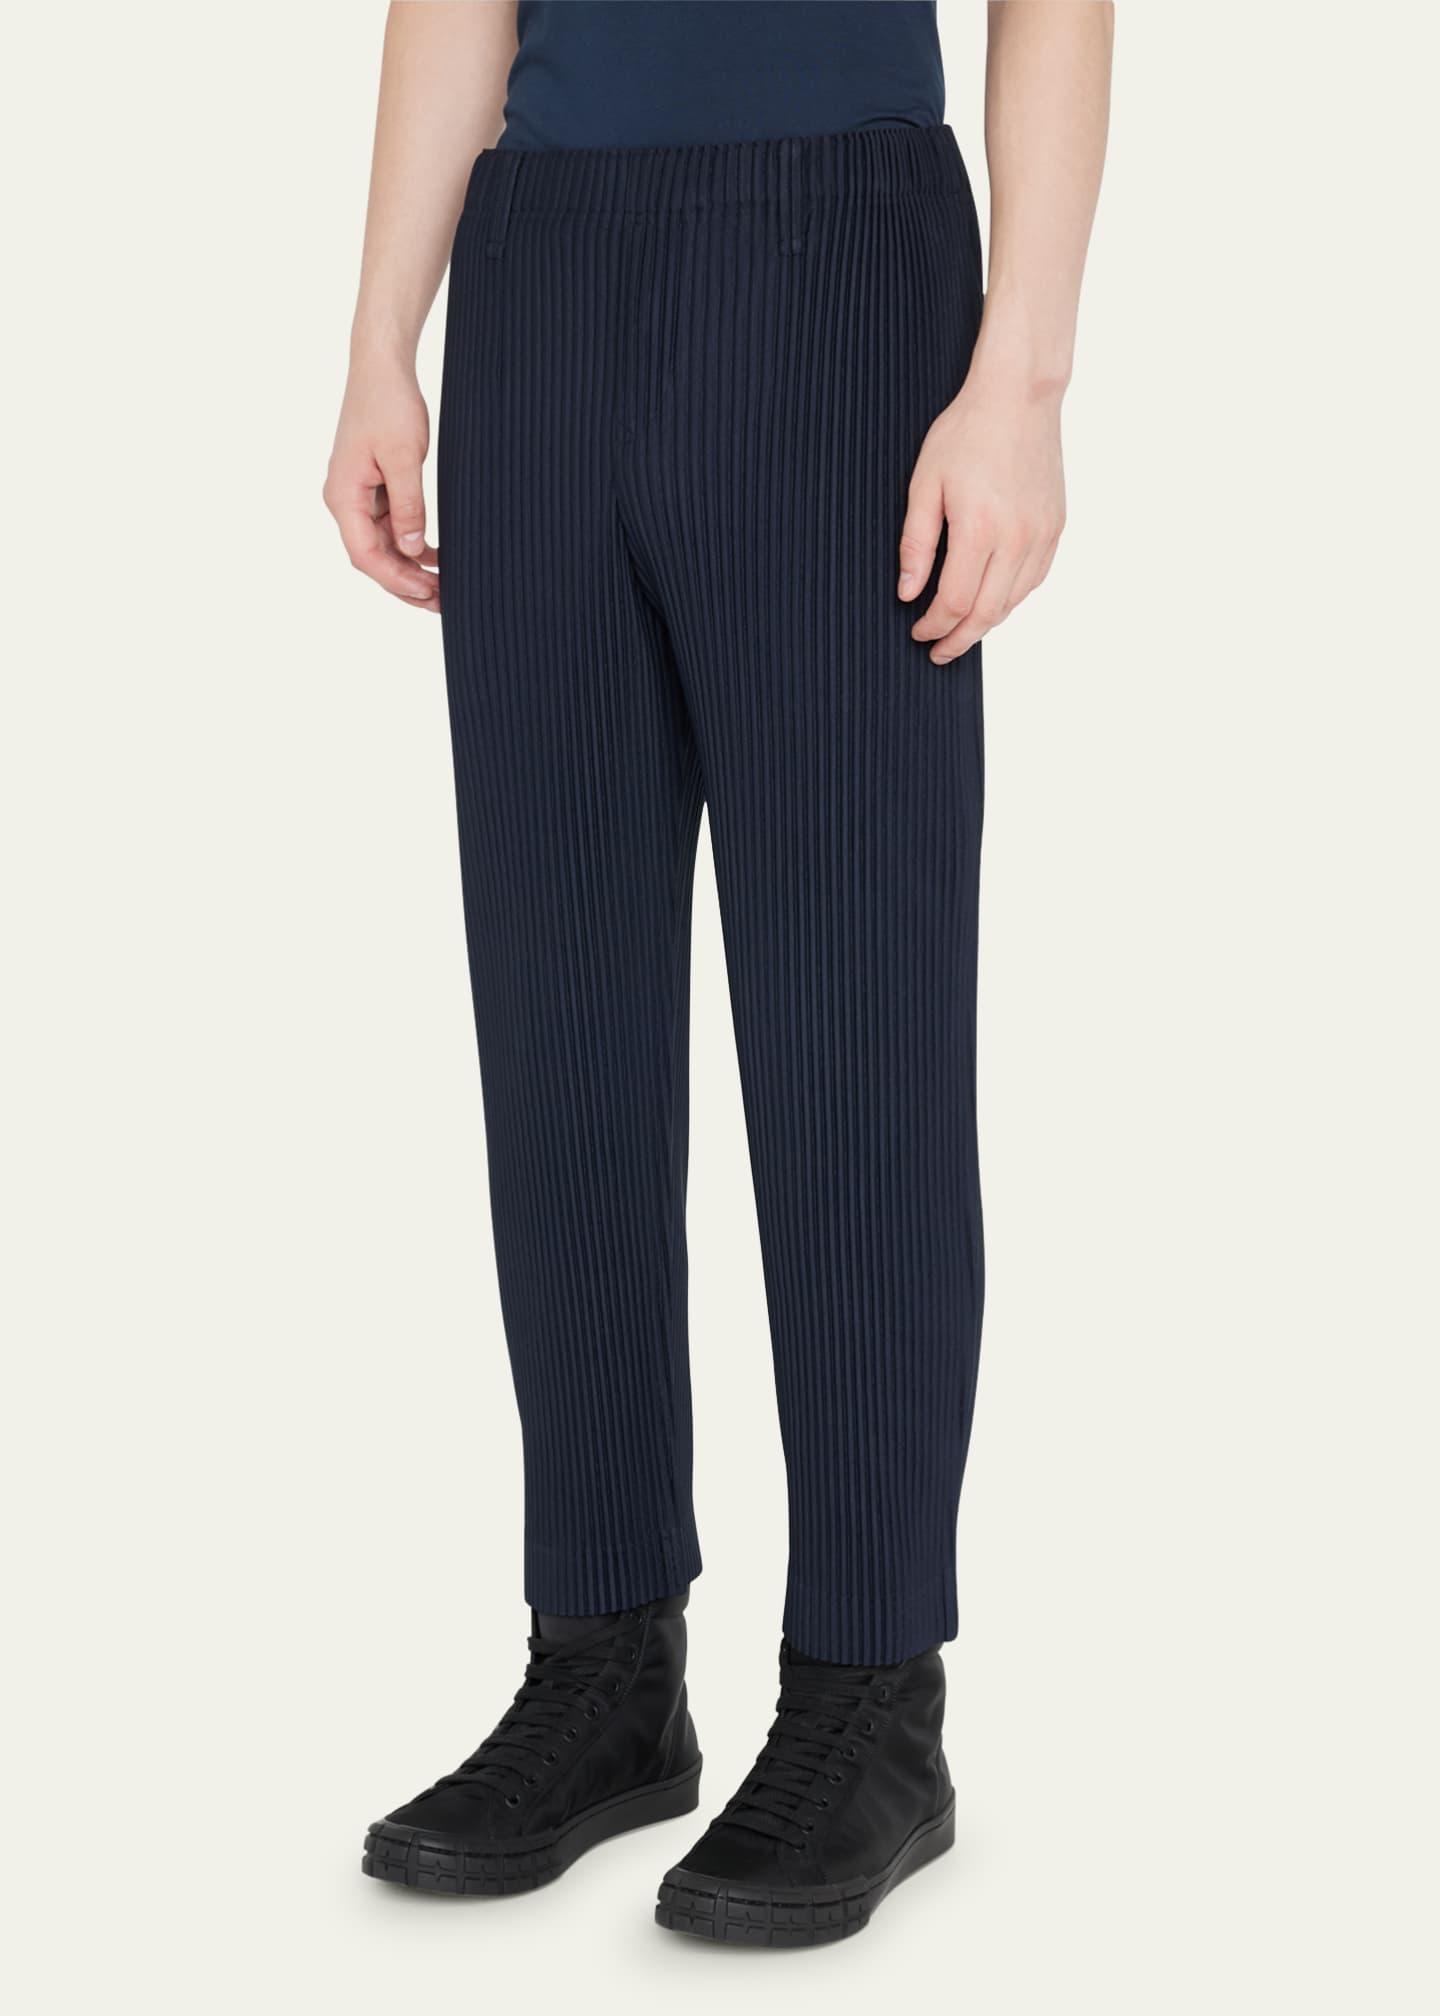 Homme Plisse Issey Miyake Men's Pleated Polyester Pants   Bergdorf